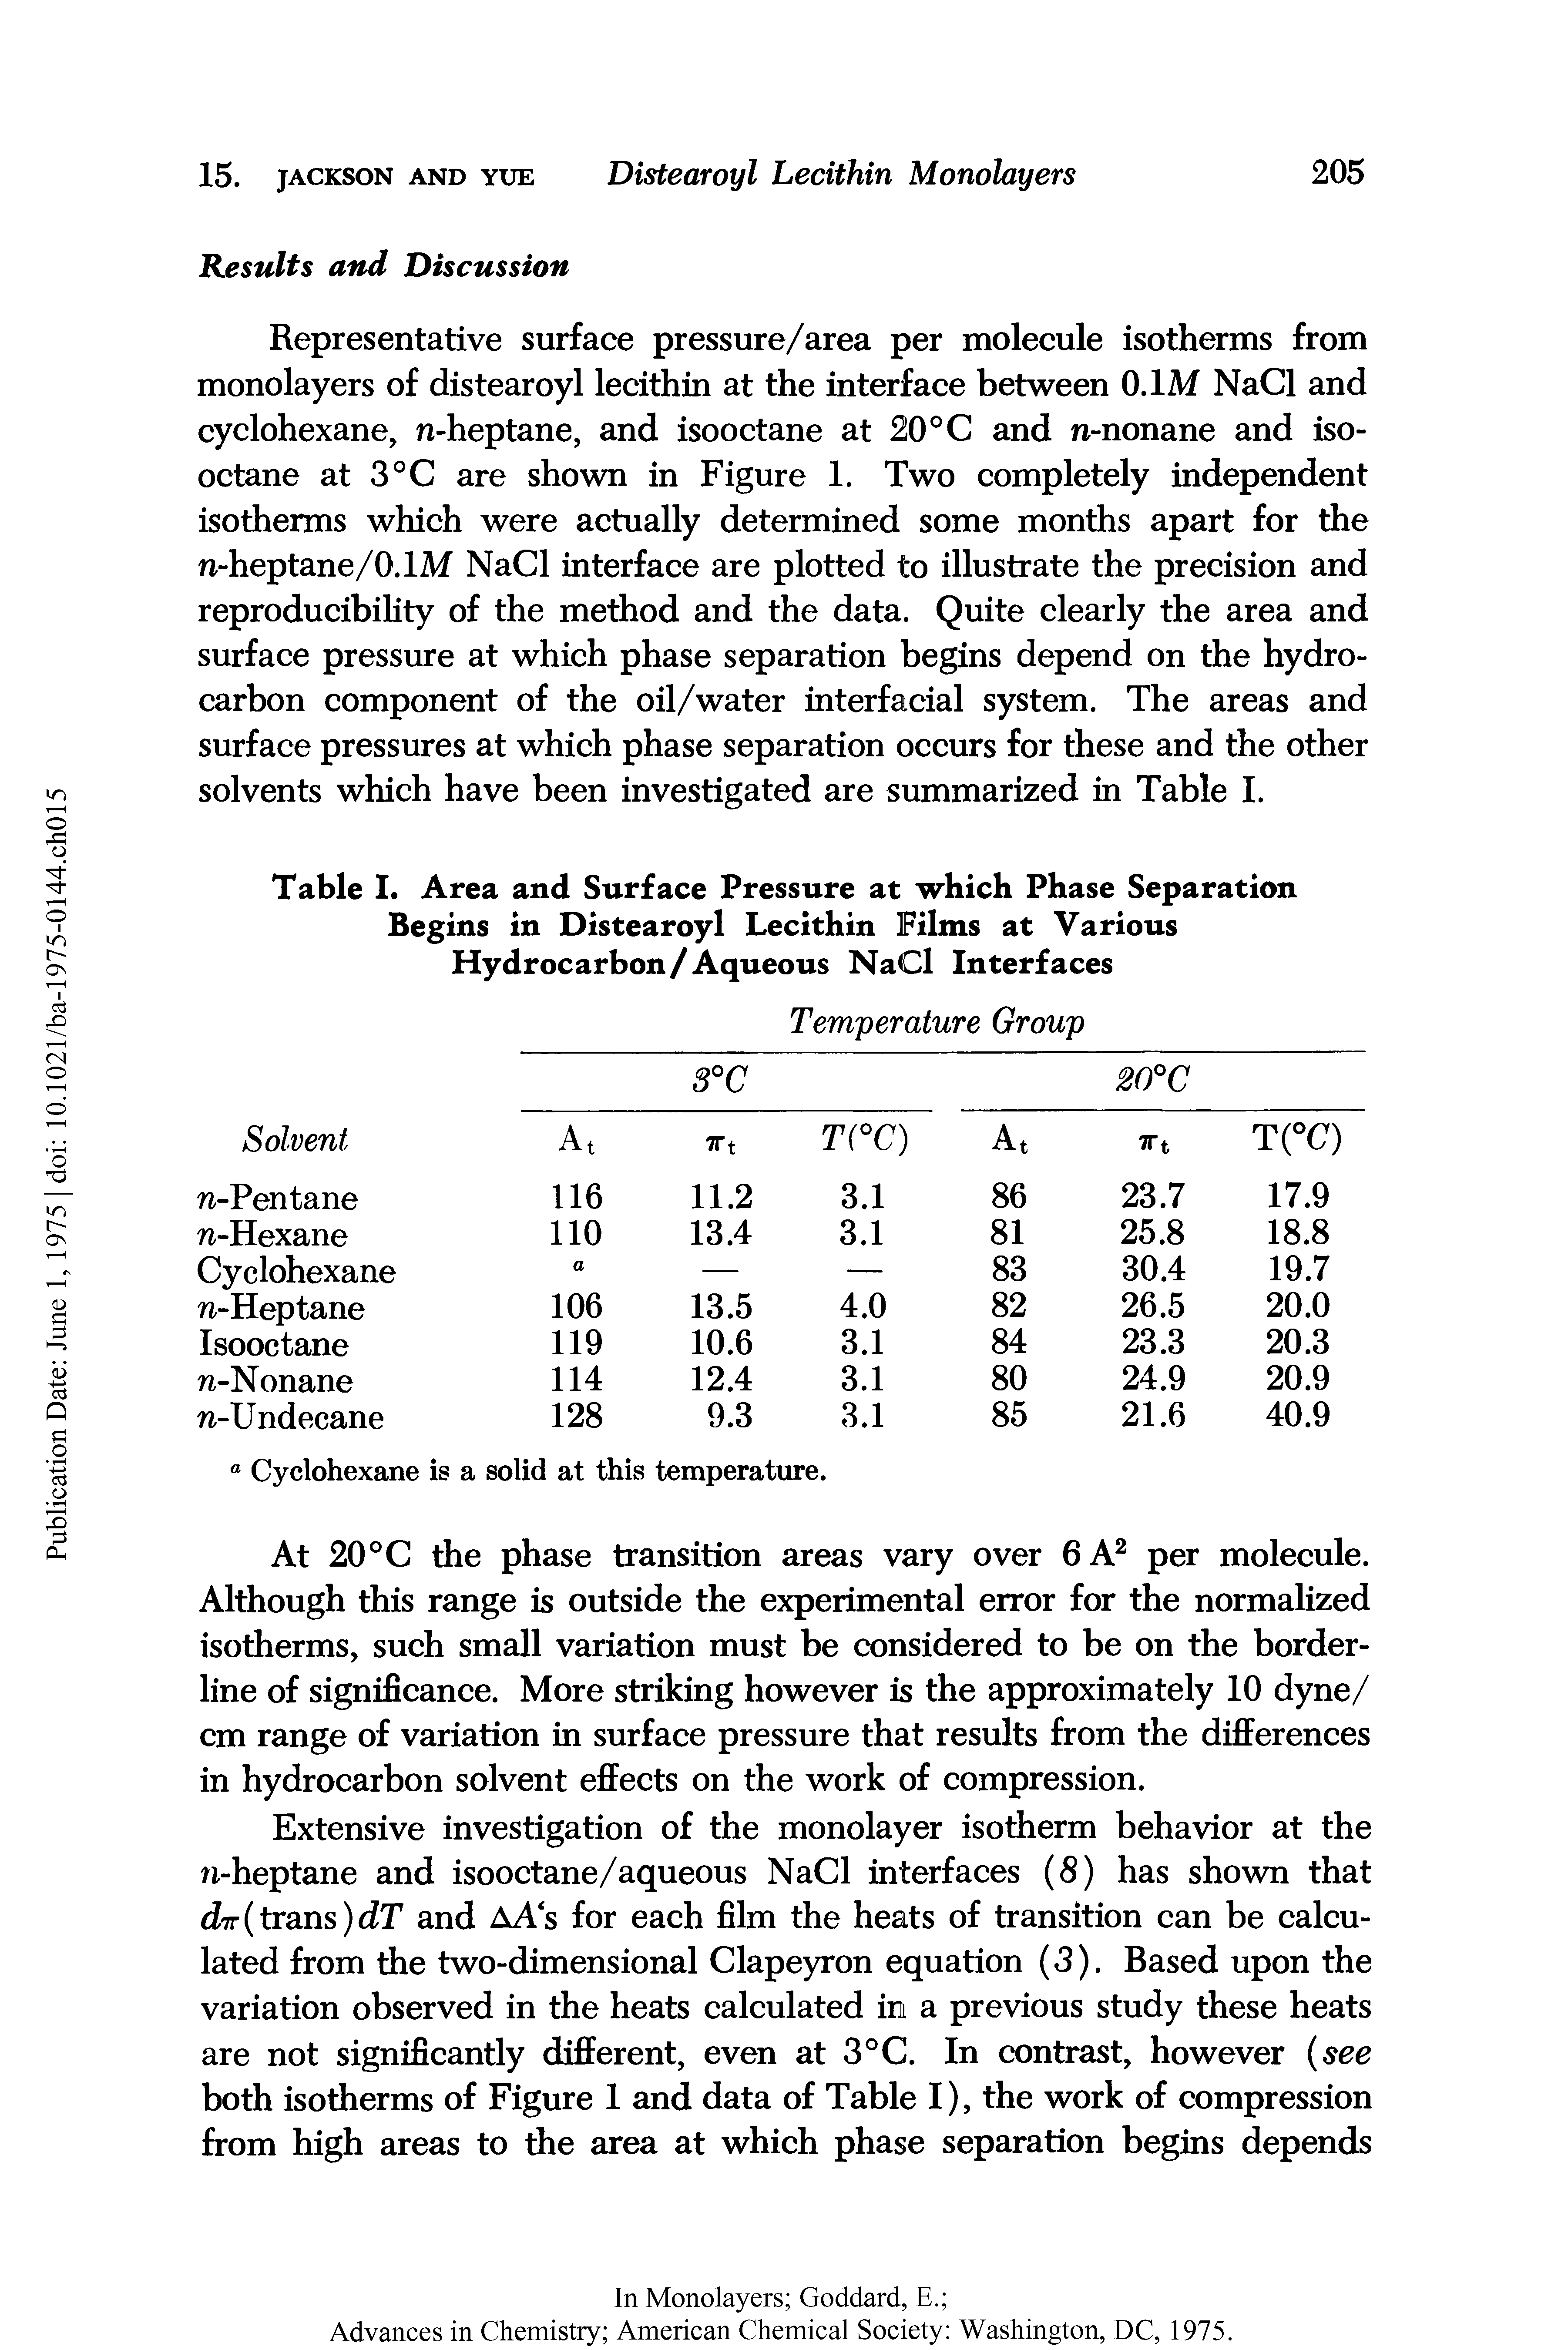 Table I. Area and Surface Pressure at which Phase Separation Begins in Distearoyl Lecithin Films at Various Hydrocarbon /Aqueous NaCl Interfaces...